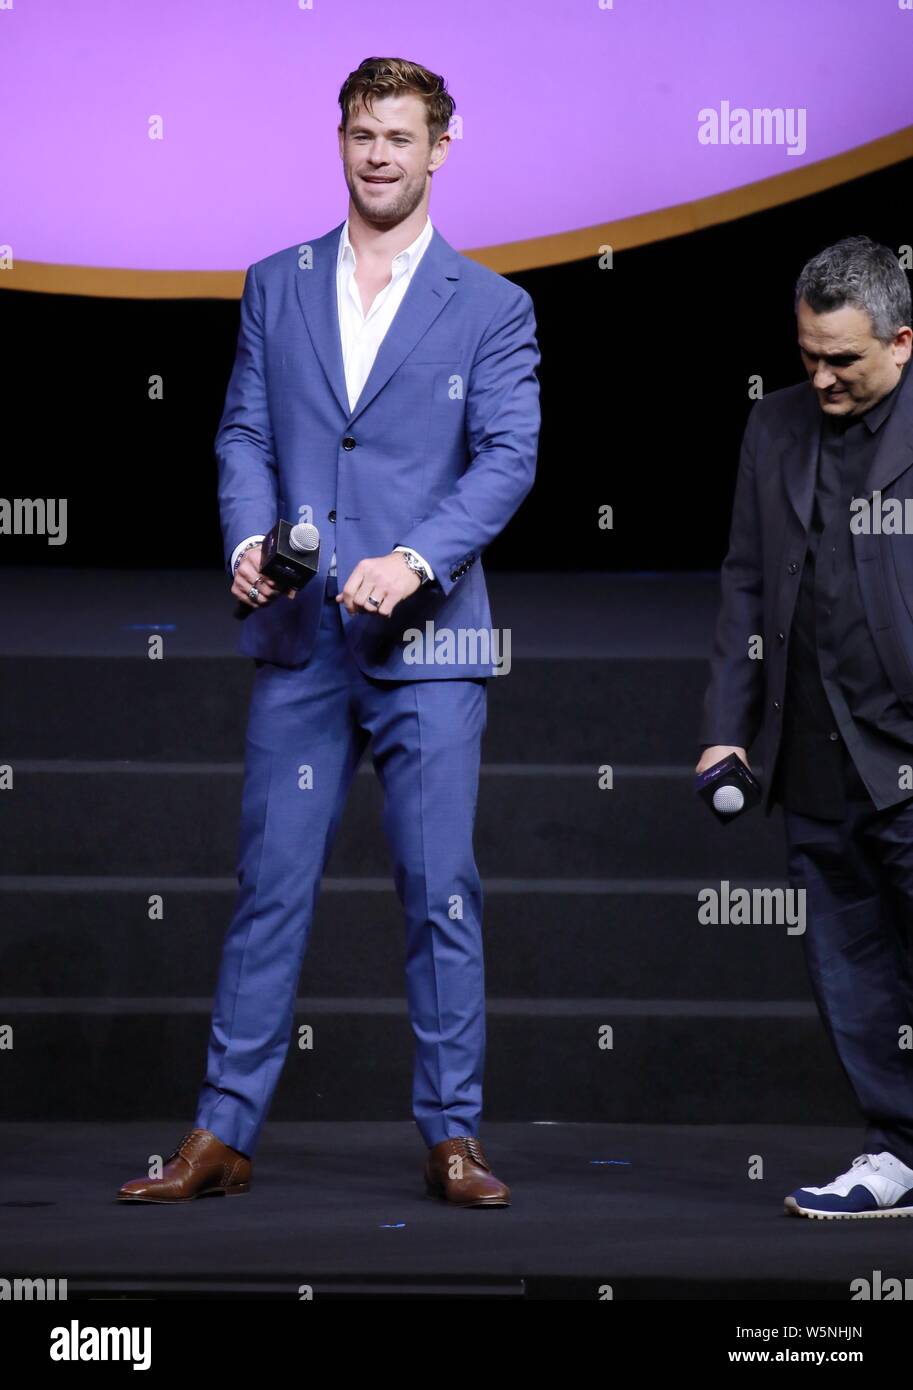 Chris Hemsworth attends a premiere event for the movie 'Avengers: Endgame' in Shanghai, China, 18 April 2019. Stock Photo